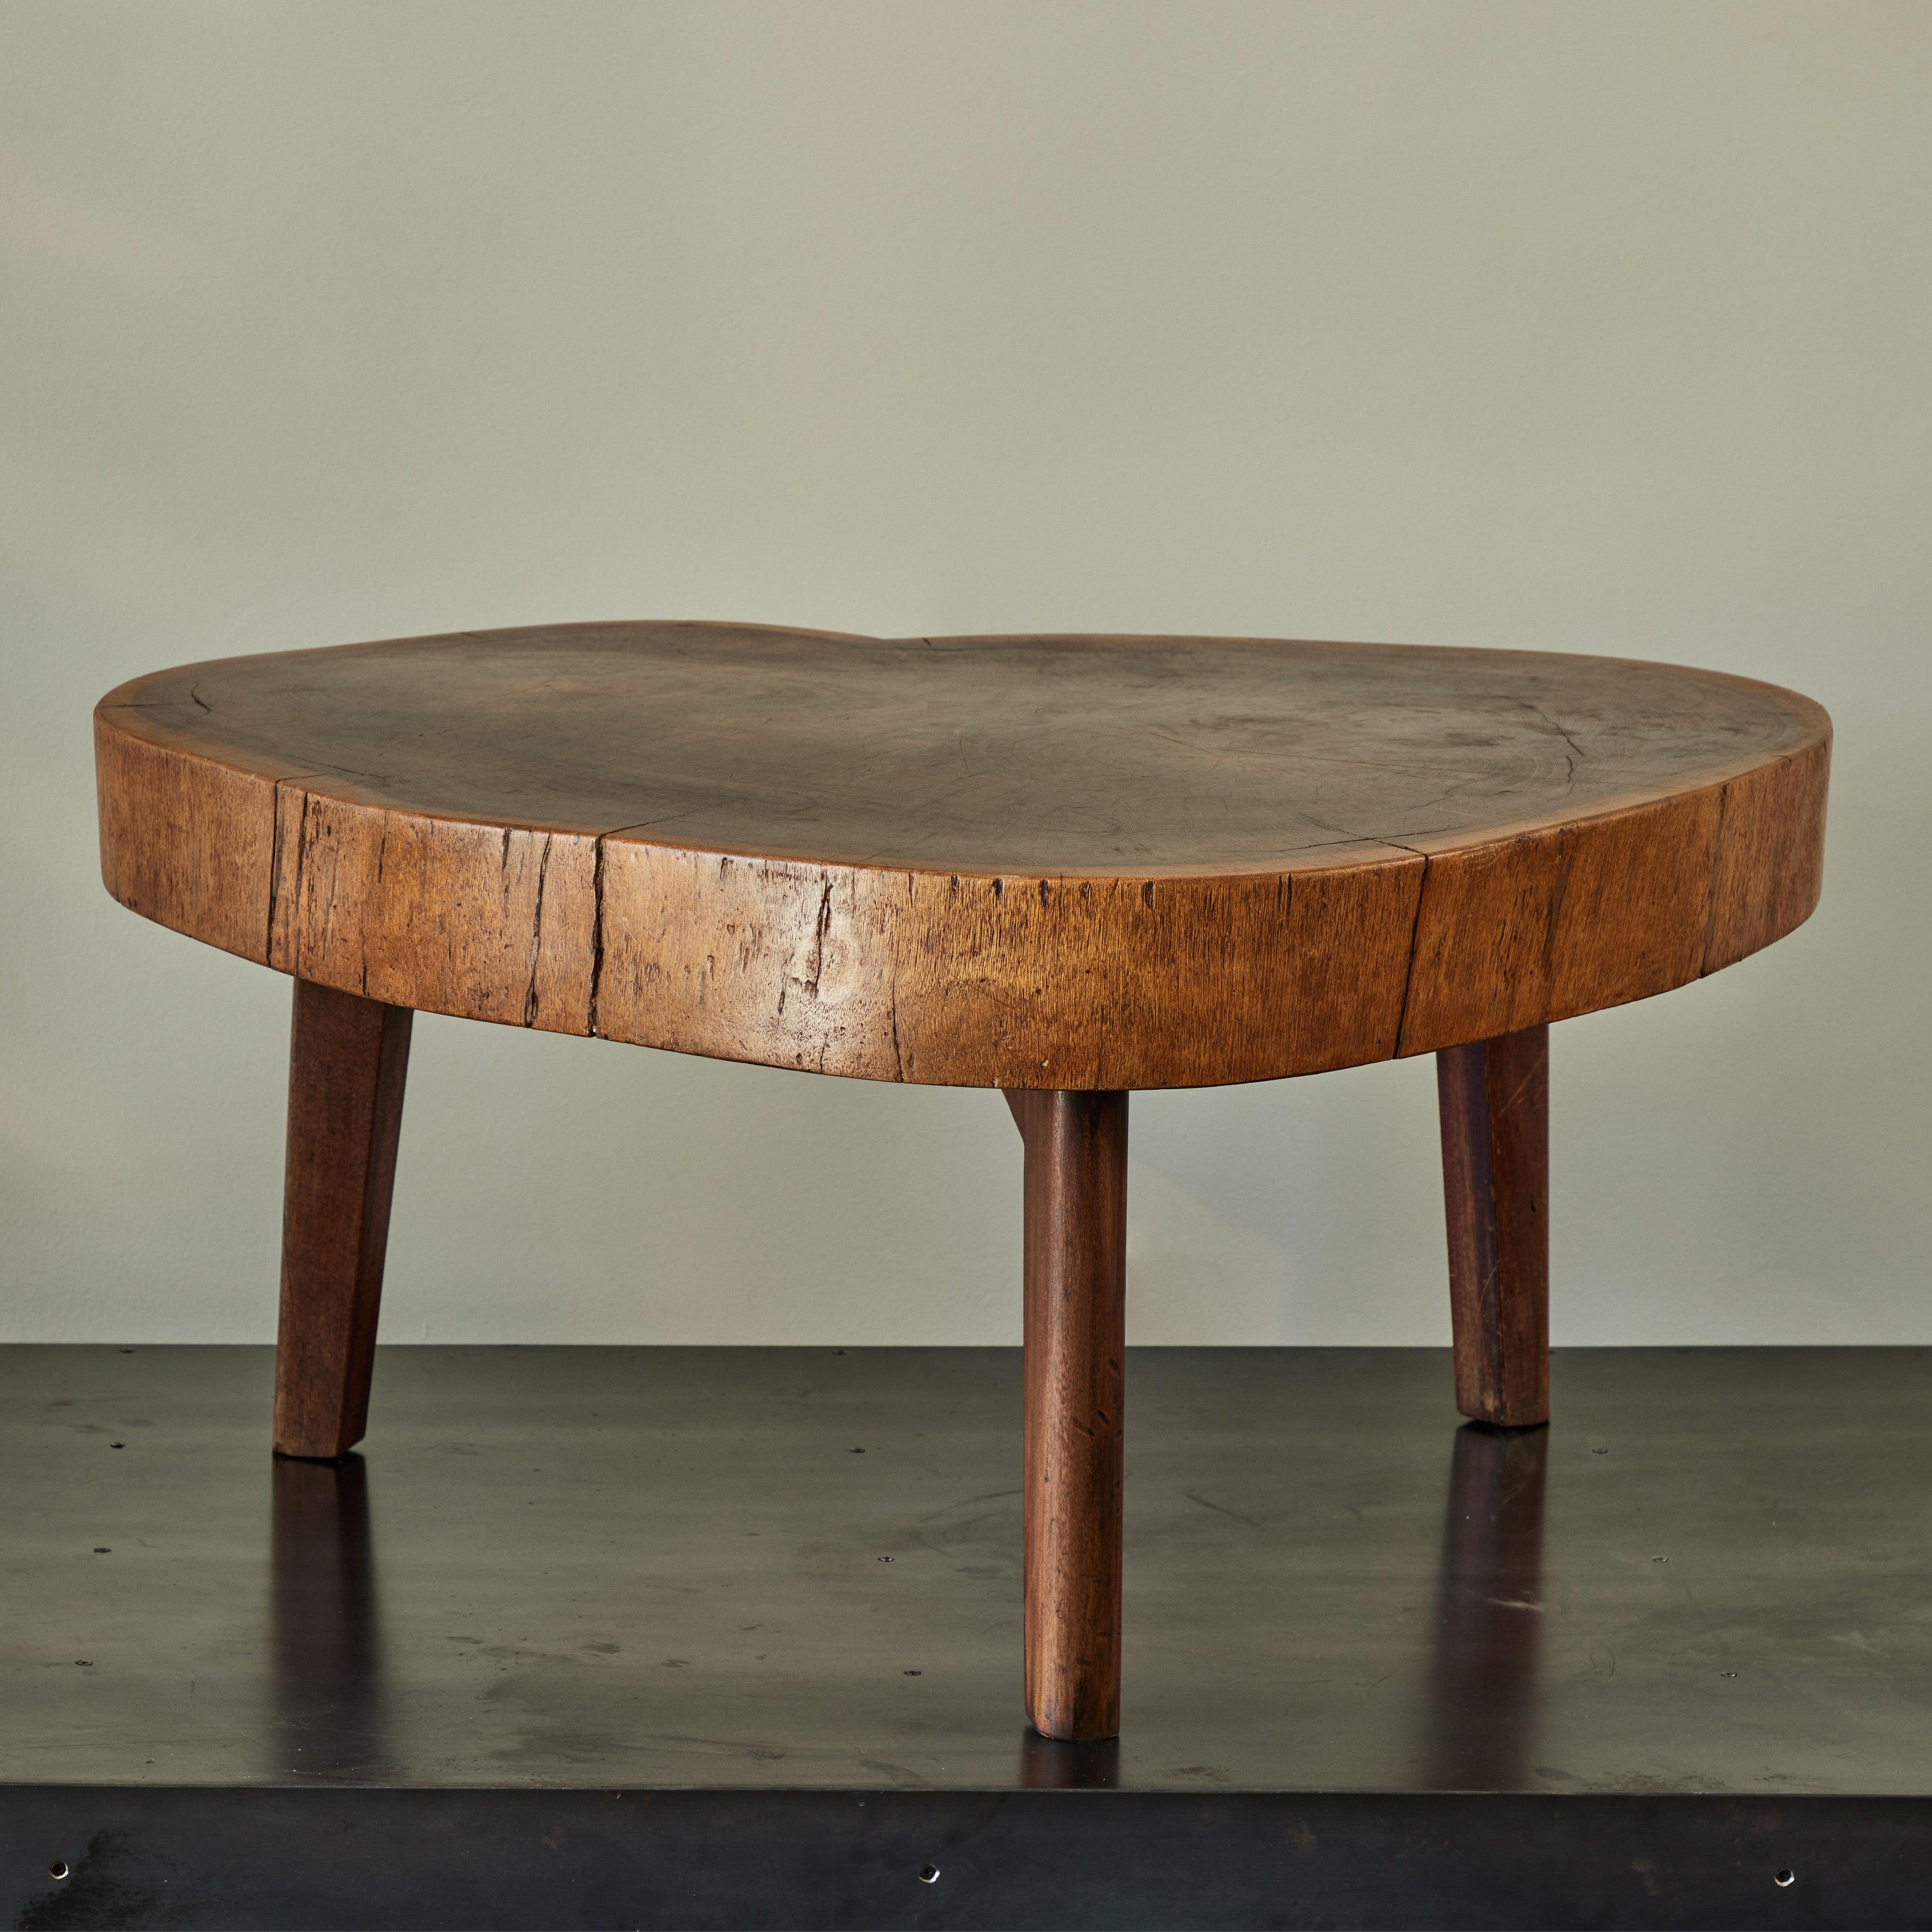 French mid-century live edge wood coffee table in a ruddy chestnut hue, set atop three slightly tapered walnut legs. The design has a swank naturalism that is both warm and inviting.

France, circa 1950

Dimensions: 42.5W x 42D x 19.5H.